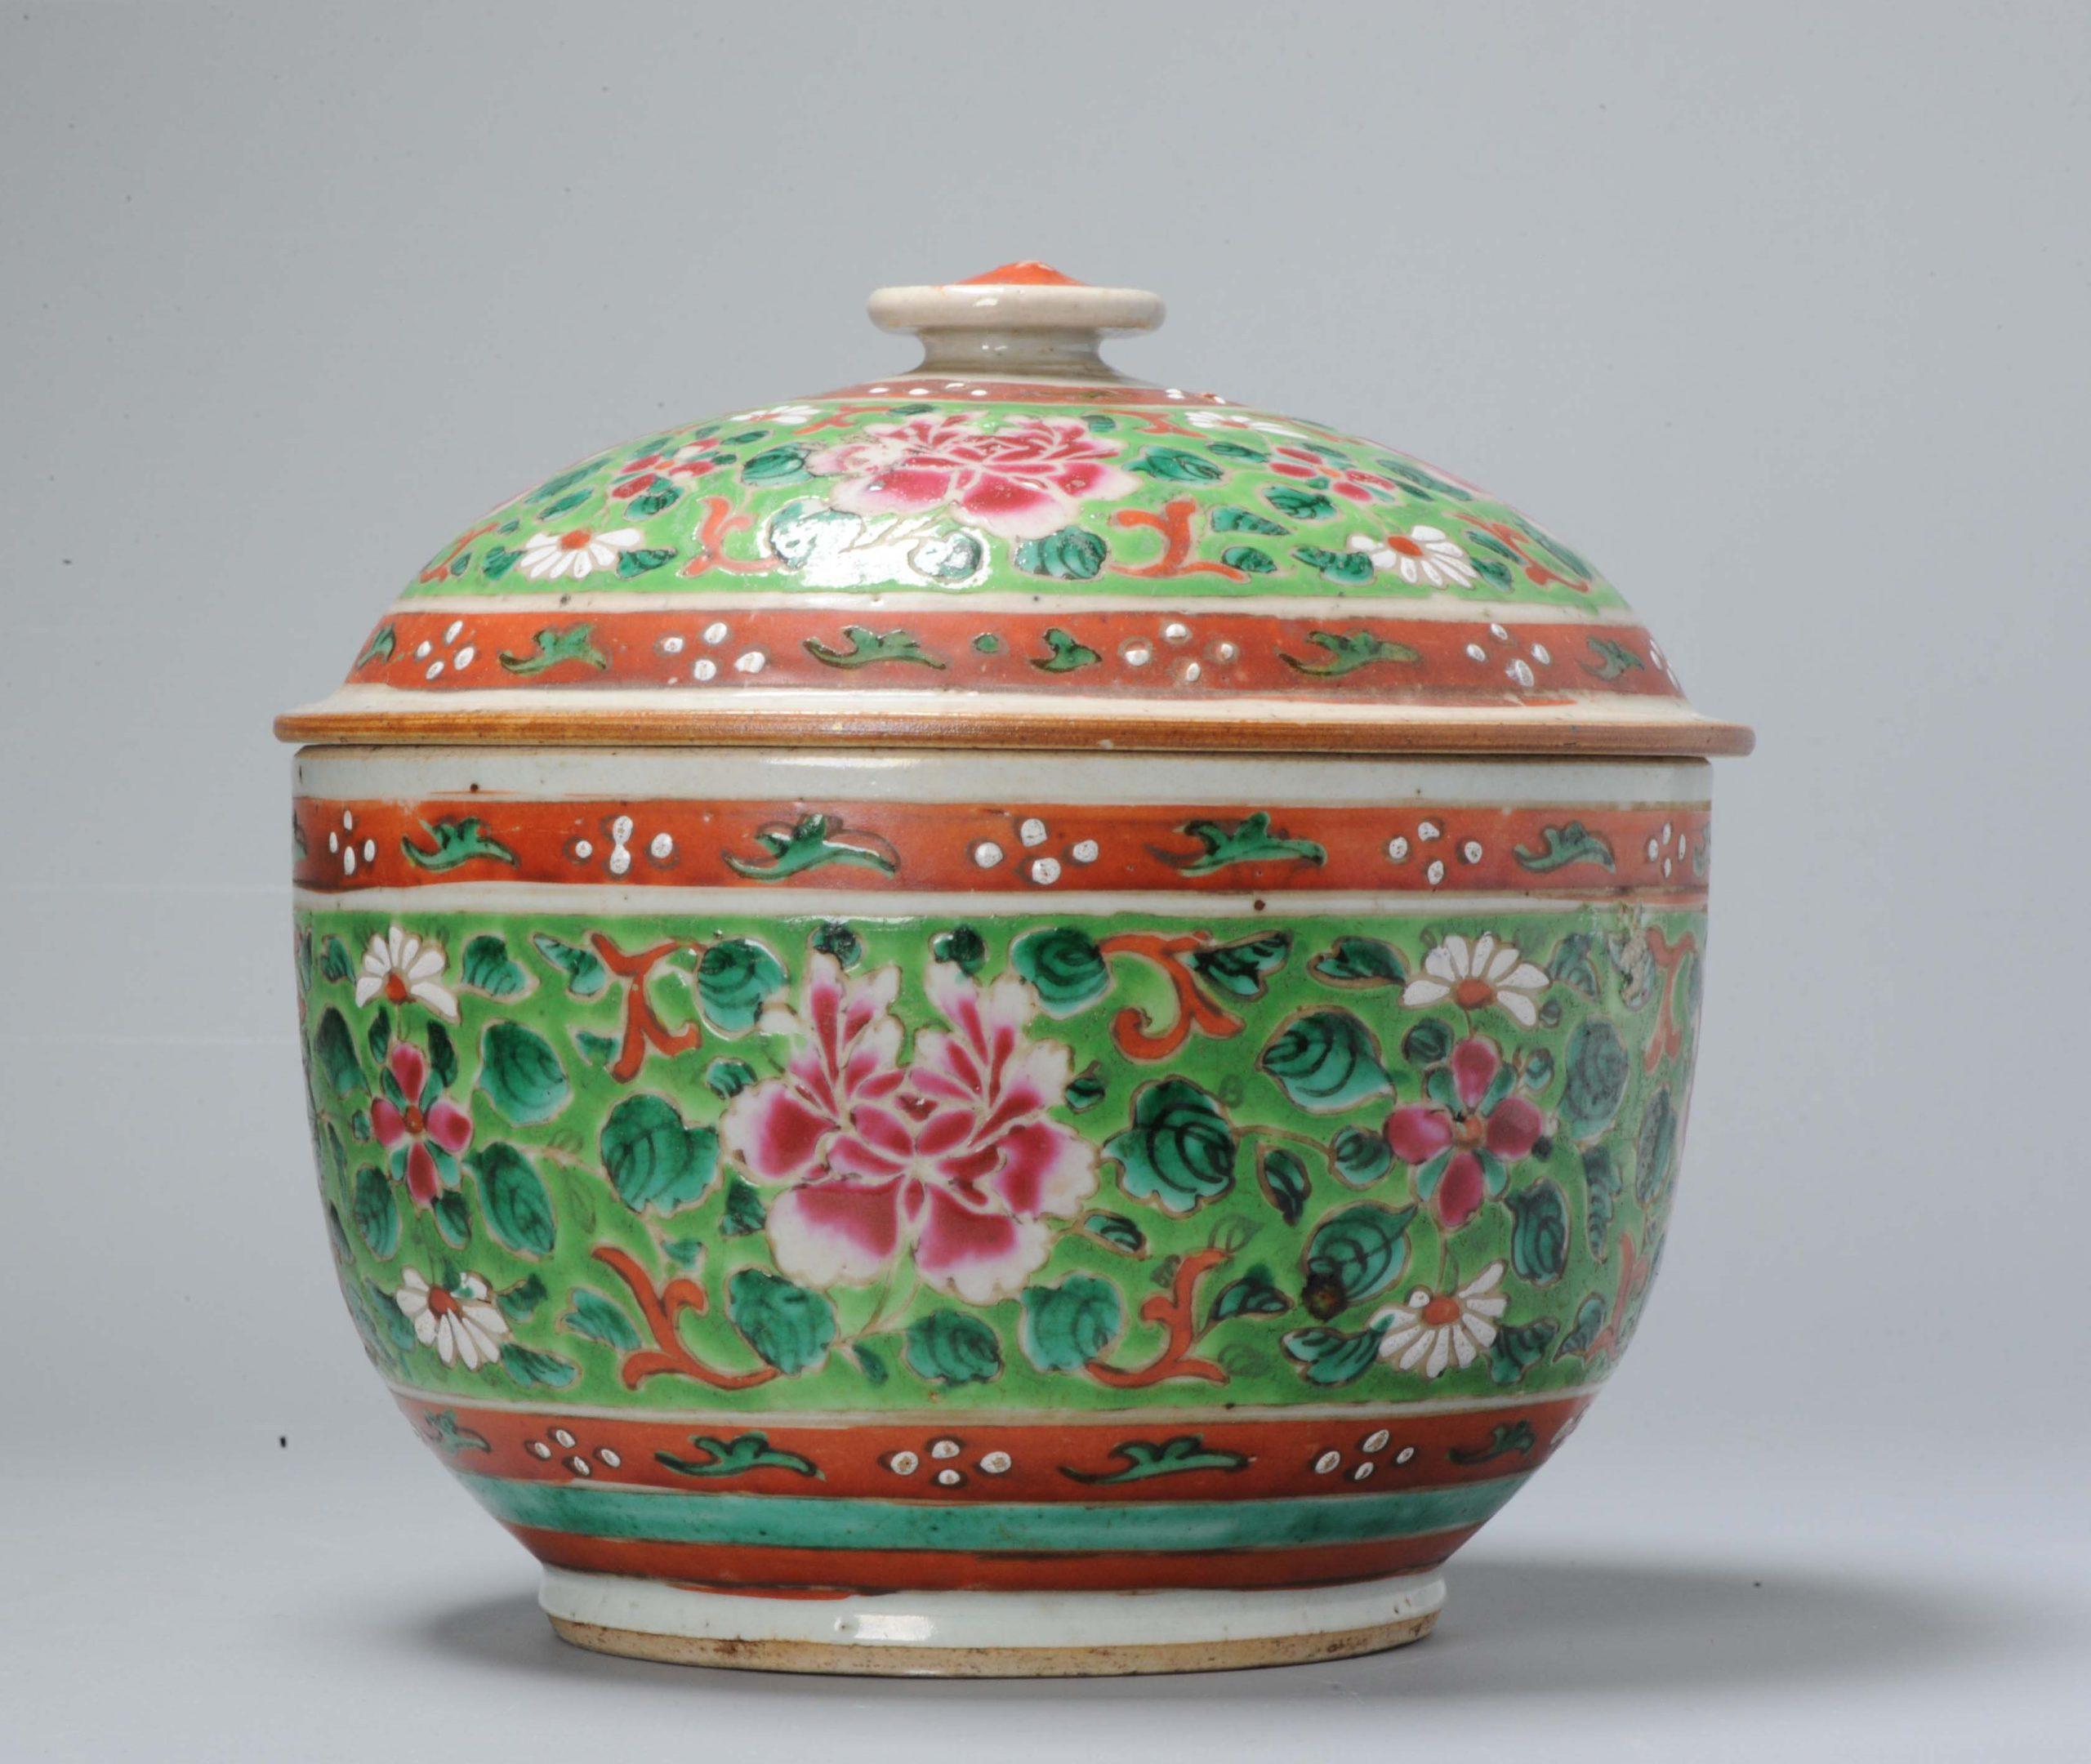 Qing Antique 18/19 Century Chinese Porcelain Thai Bencharong Jar with Flowers Green